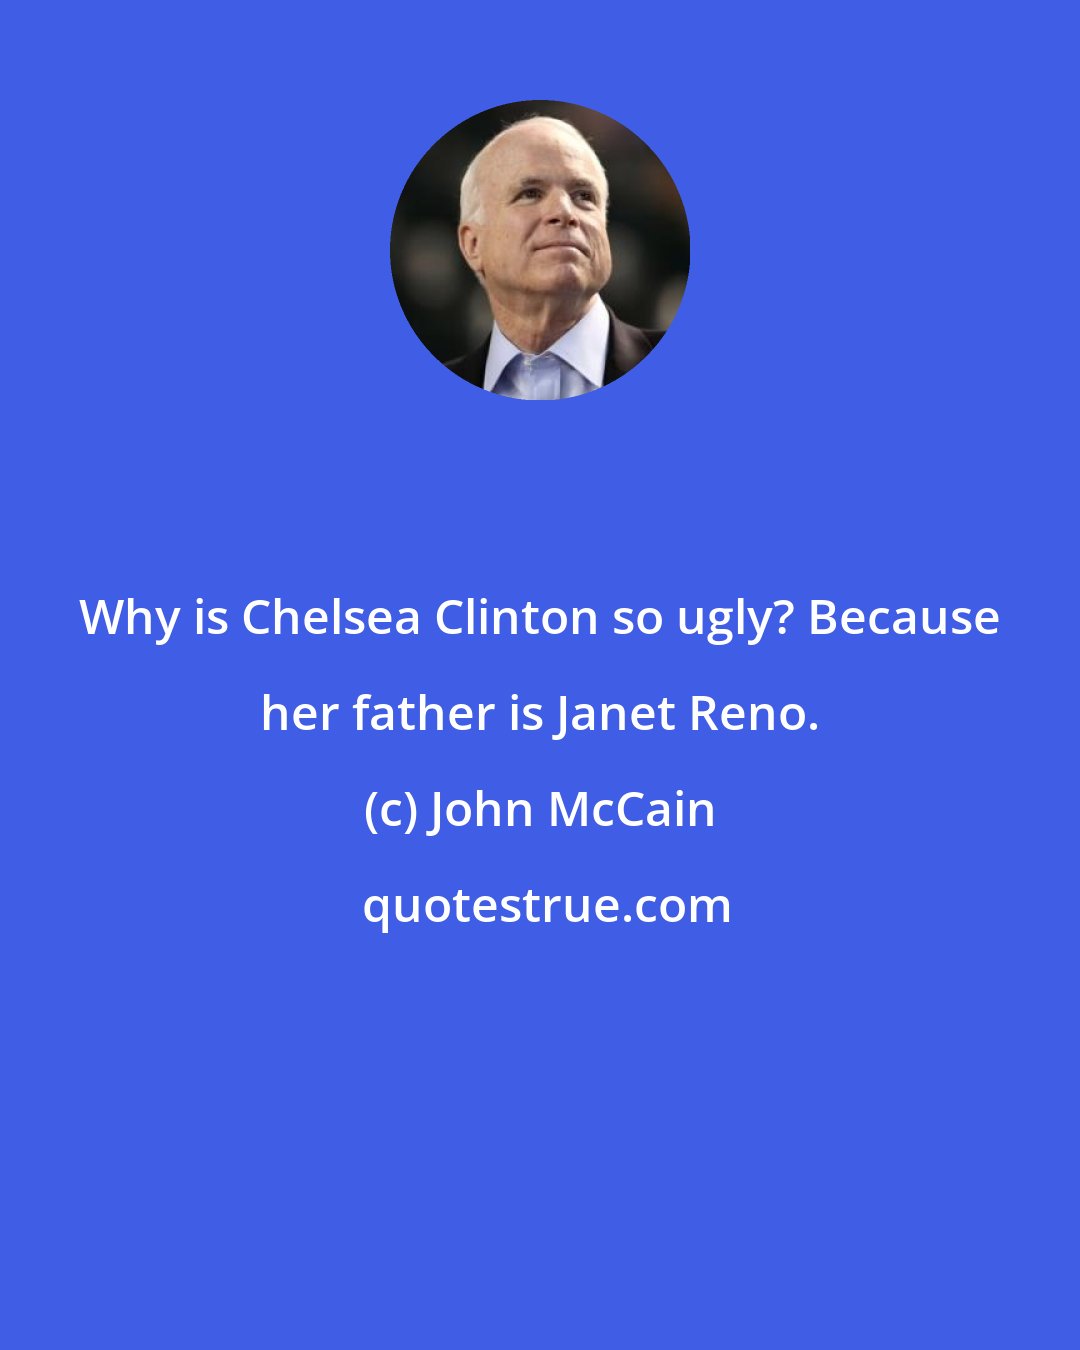 John McCain: Why is Chelsea Clinton so ugly? Because her father is Janet Reno.